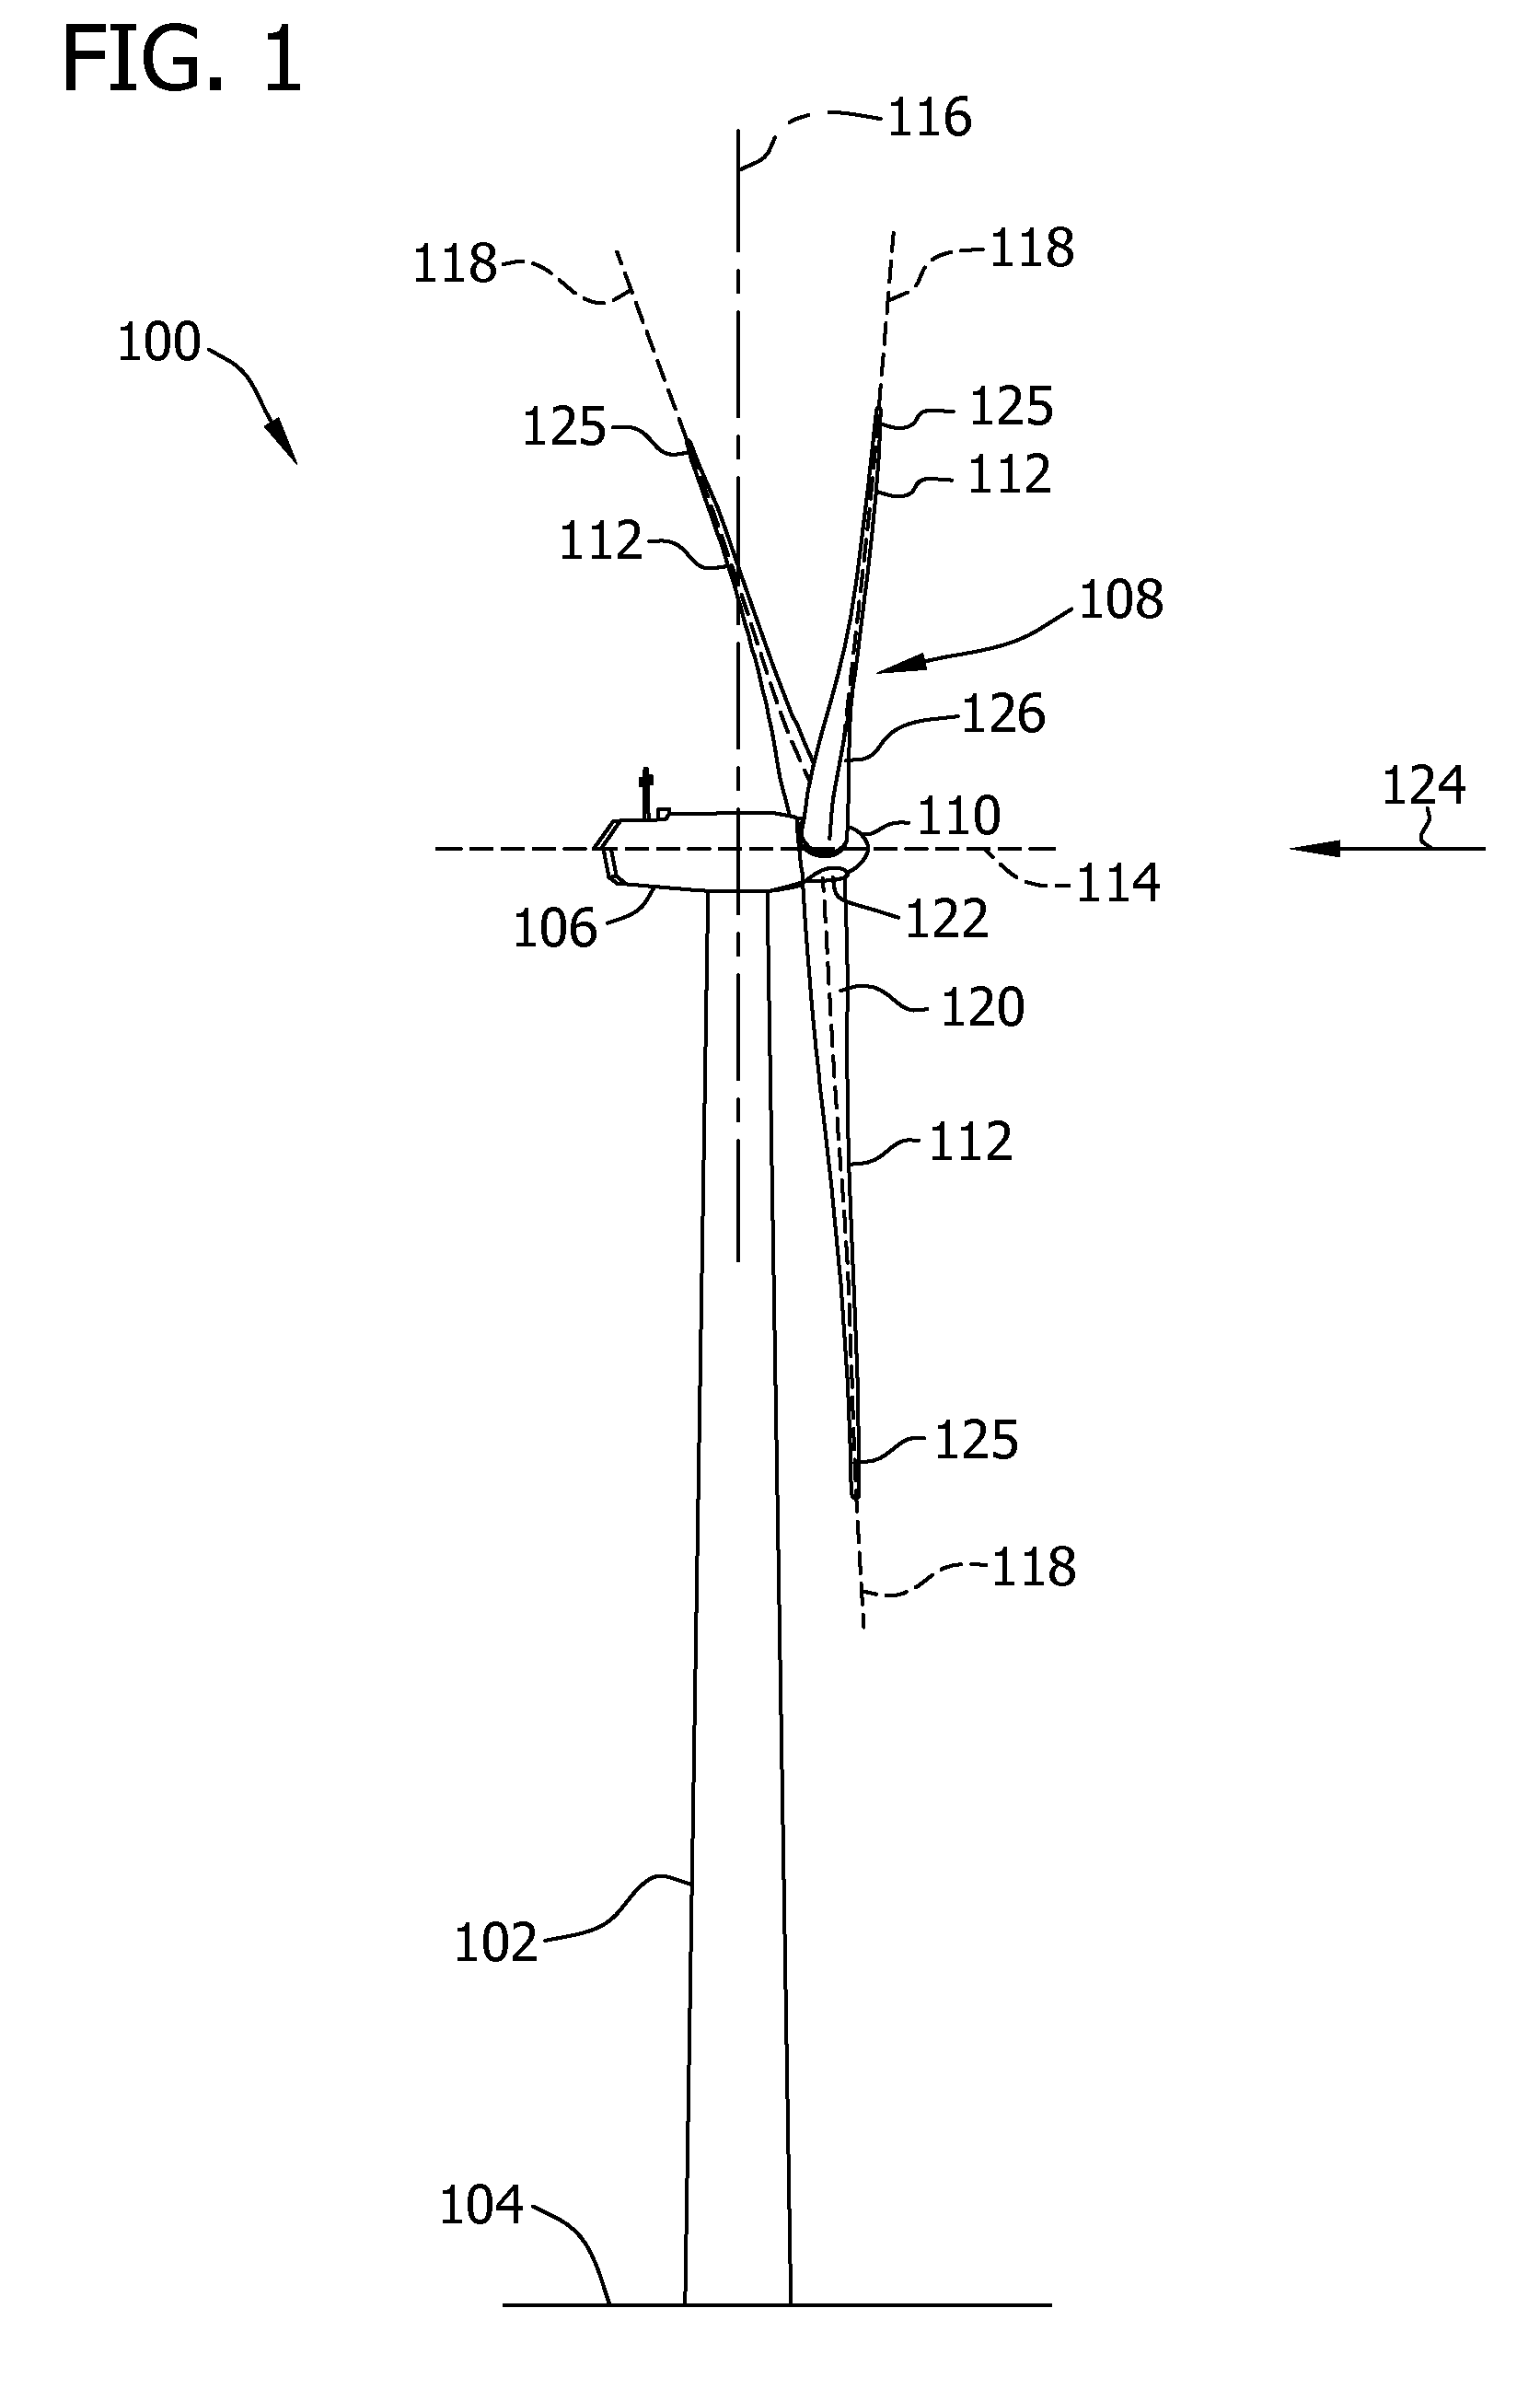 Condition monitoring system for wind turbine generator and method for operating wind turbine generator